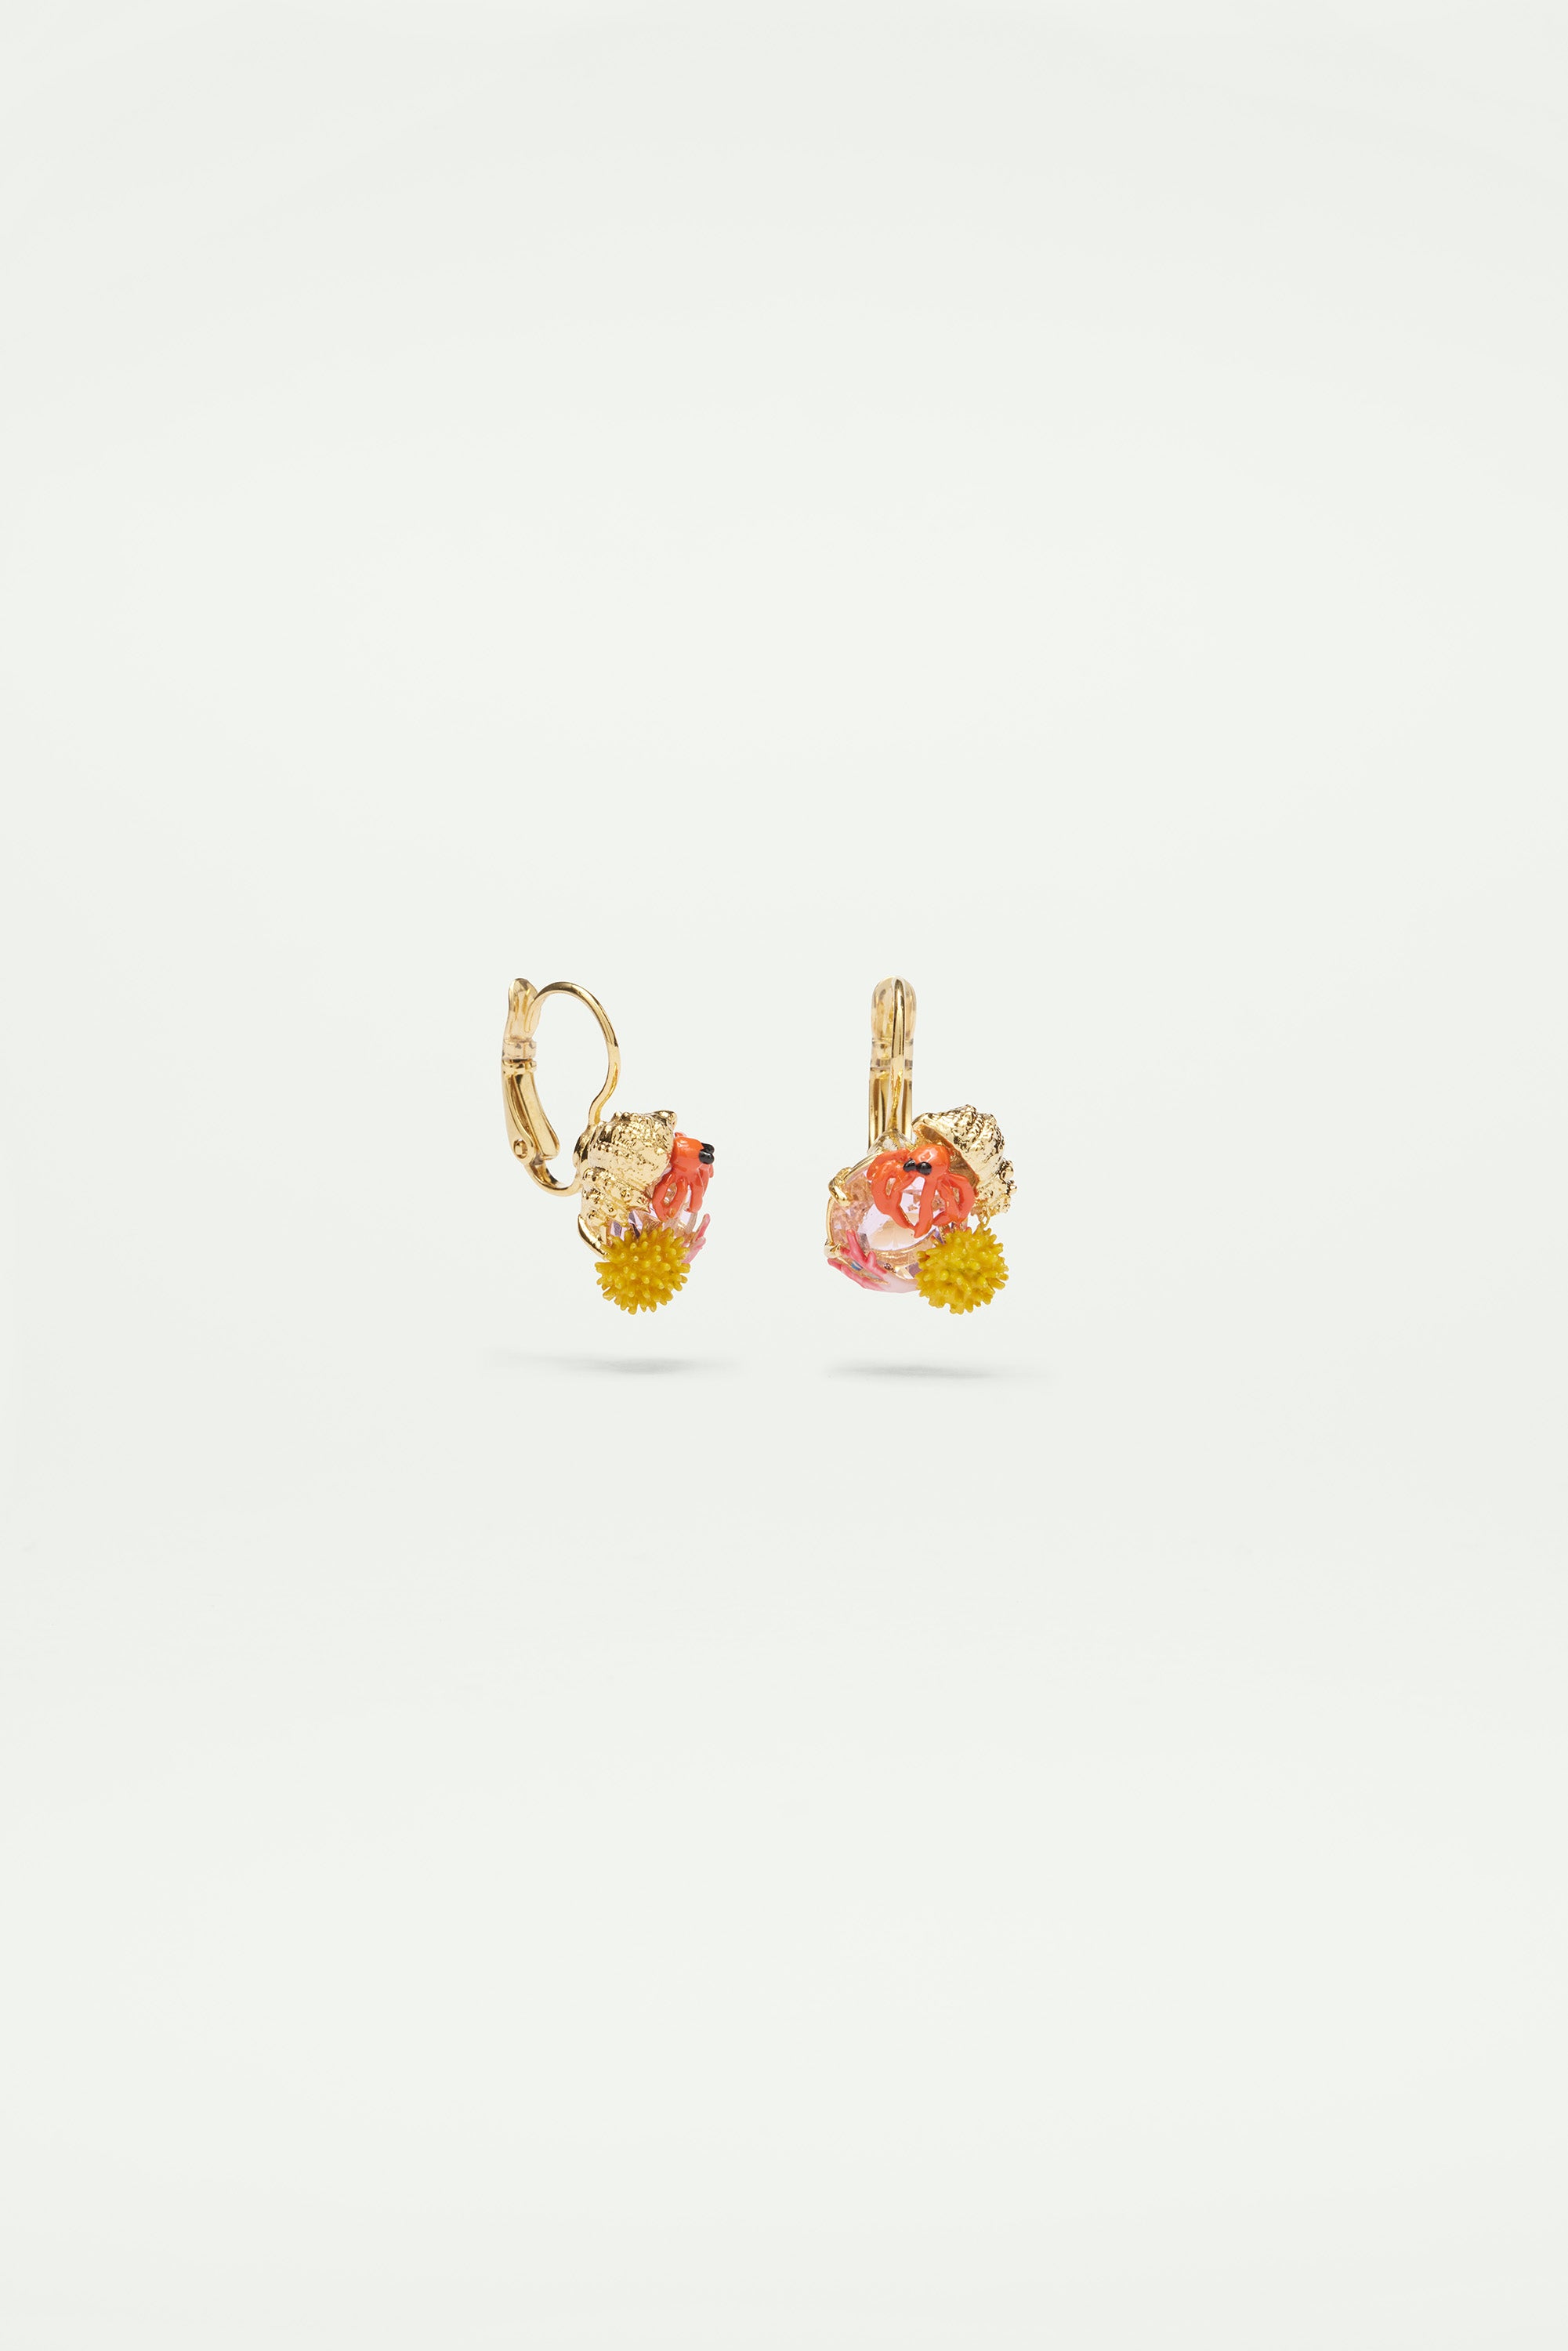 Hermit crab and light pink cut glass stone sleeper earrings